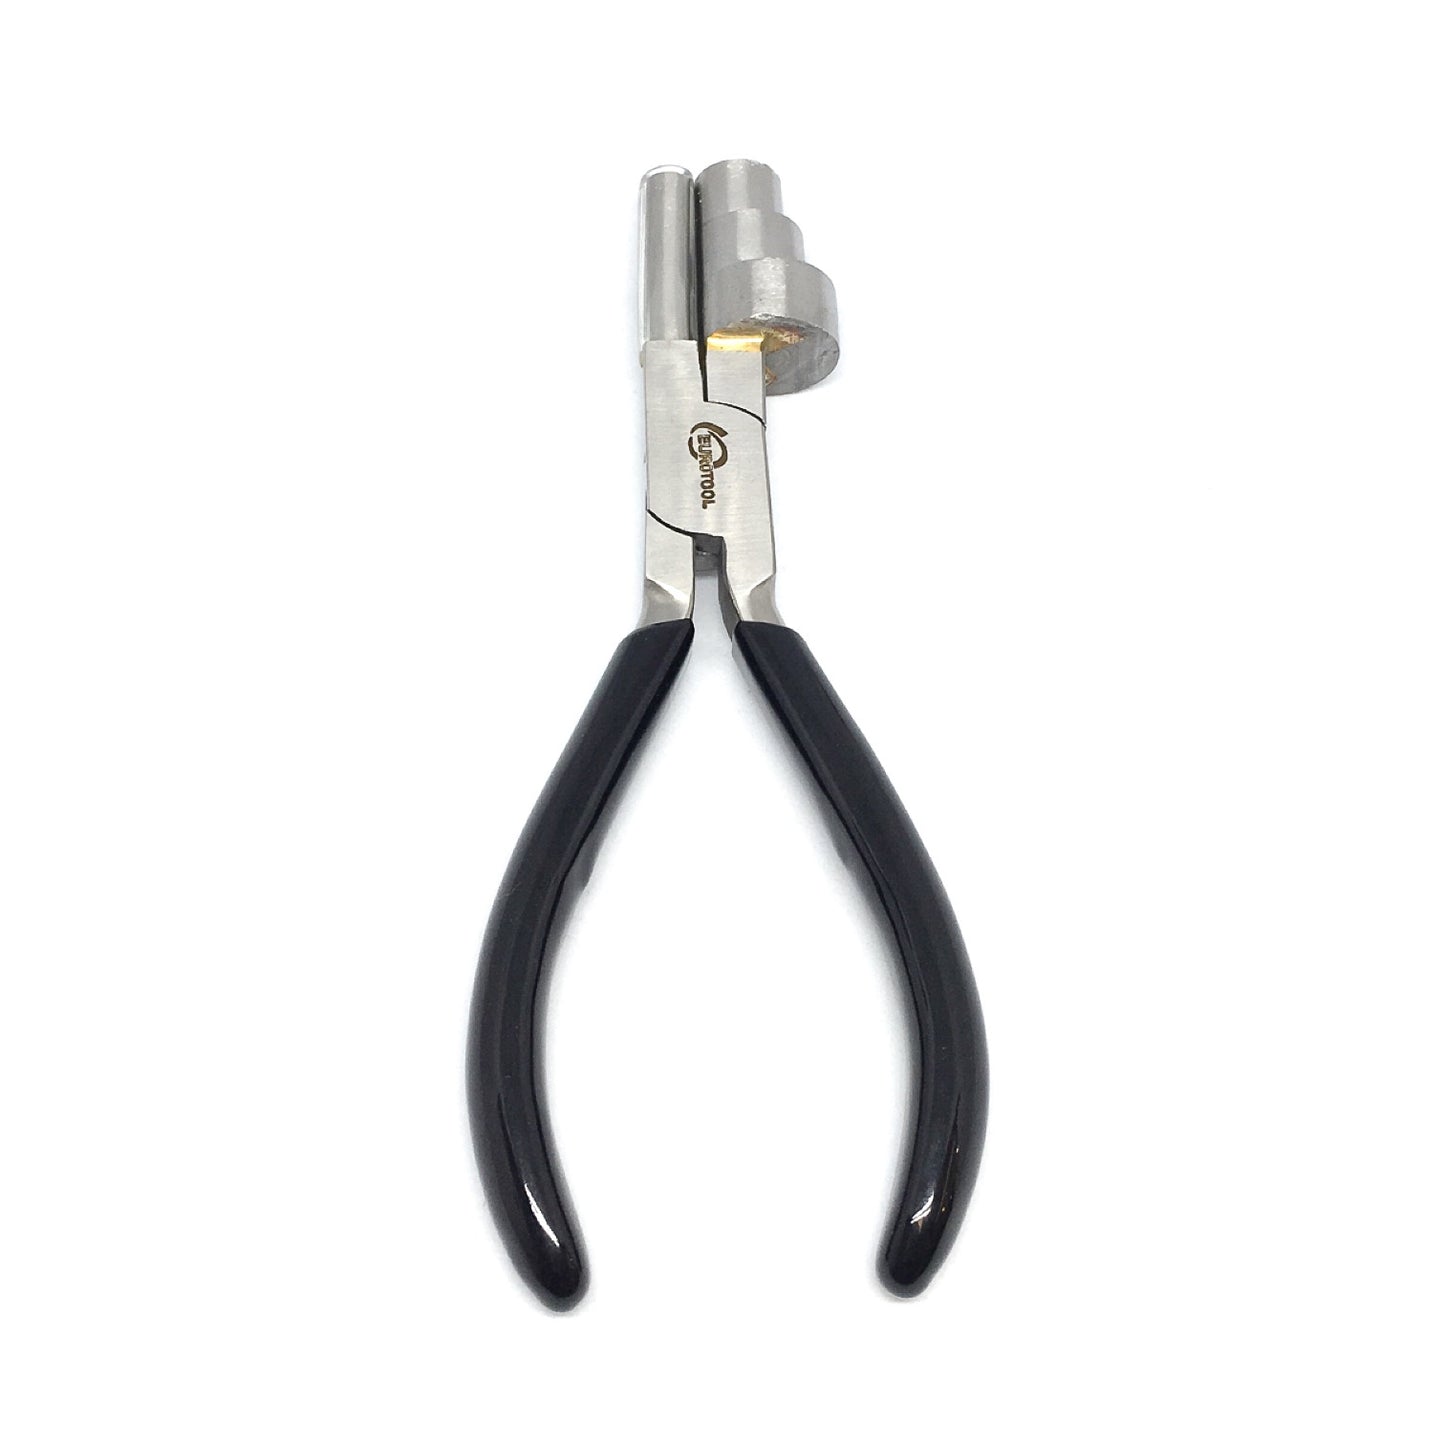 Wrap and Tap Pliers - Large 3-Step